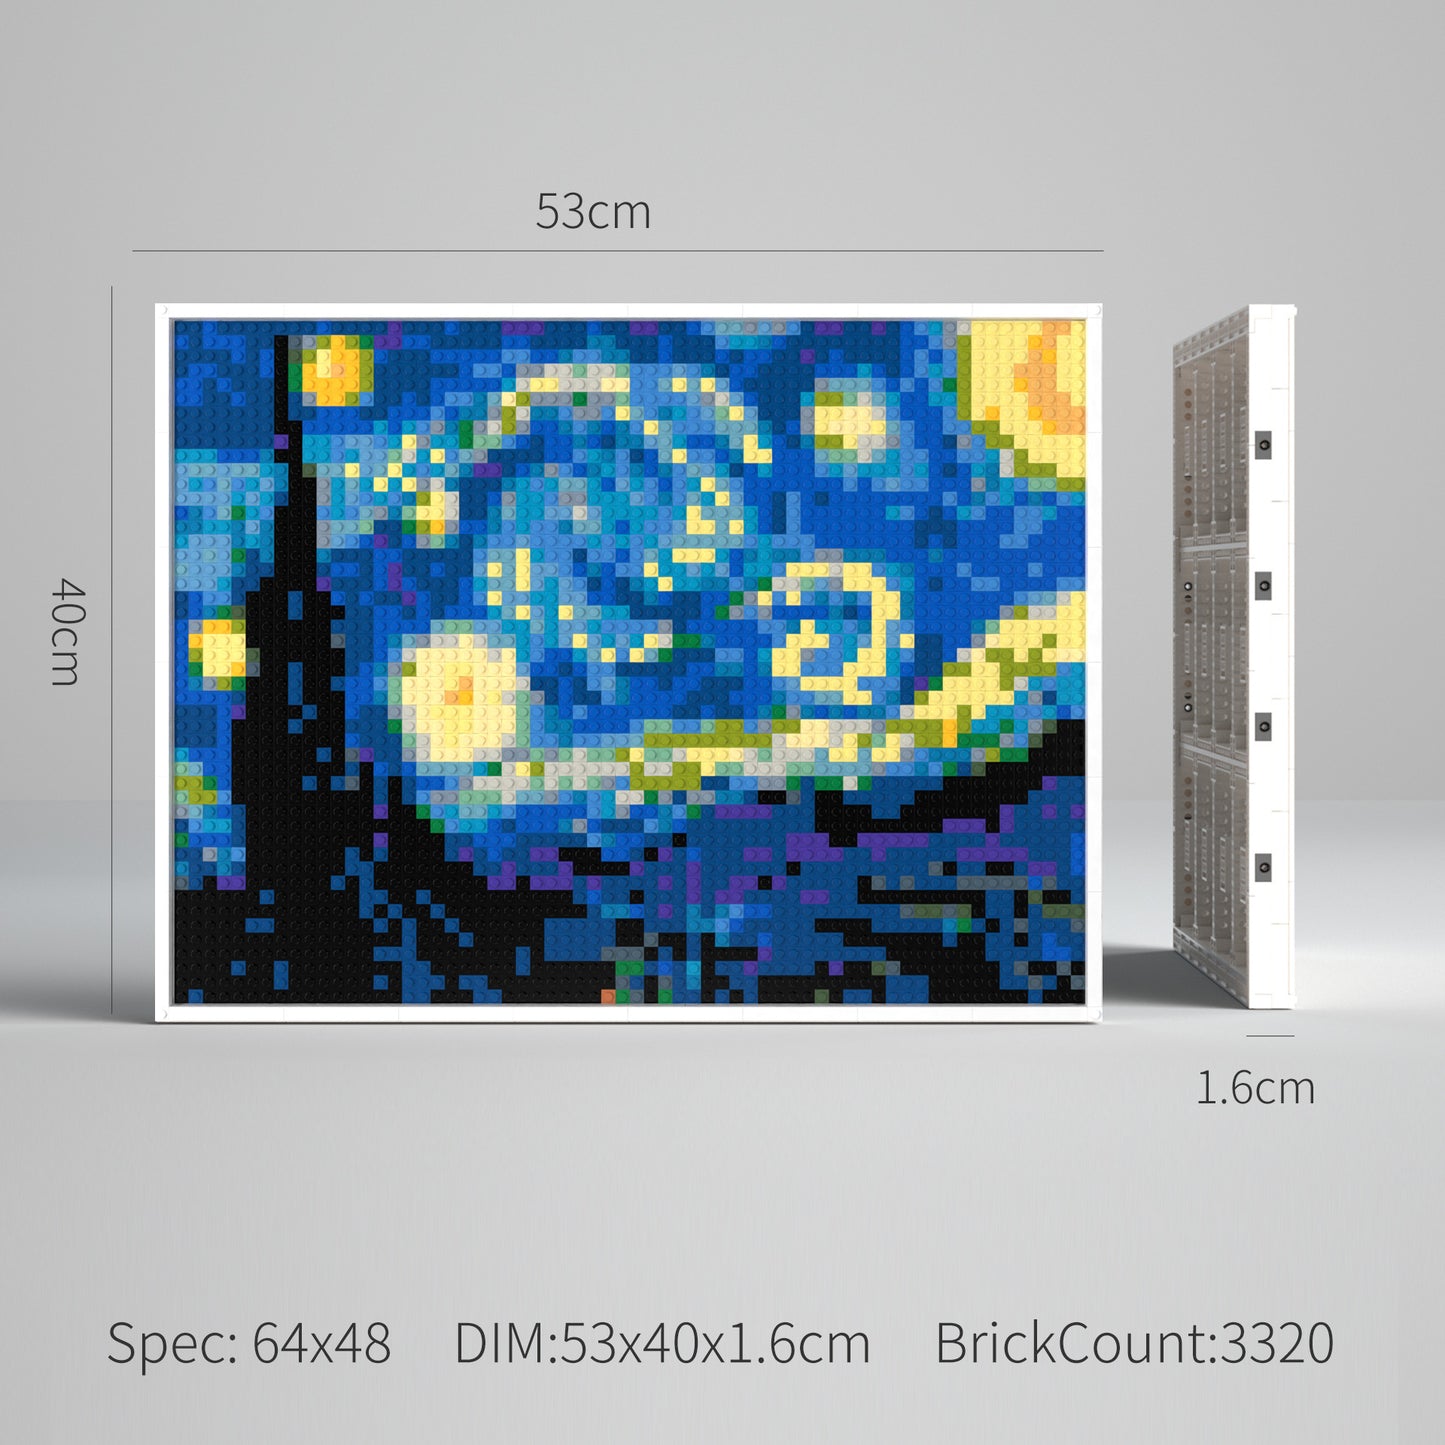 Vincent van Gogh's The Starry Night Compatible with Lego DIY Pixel Art Blocks Set with Frame